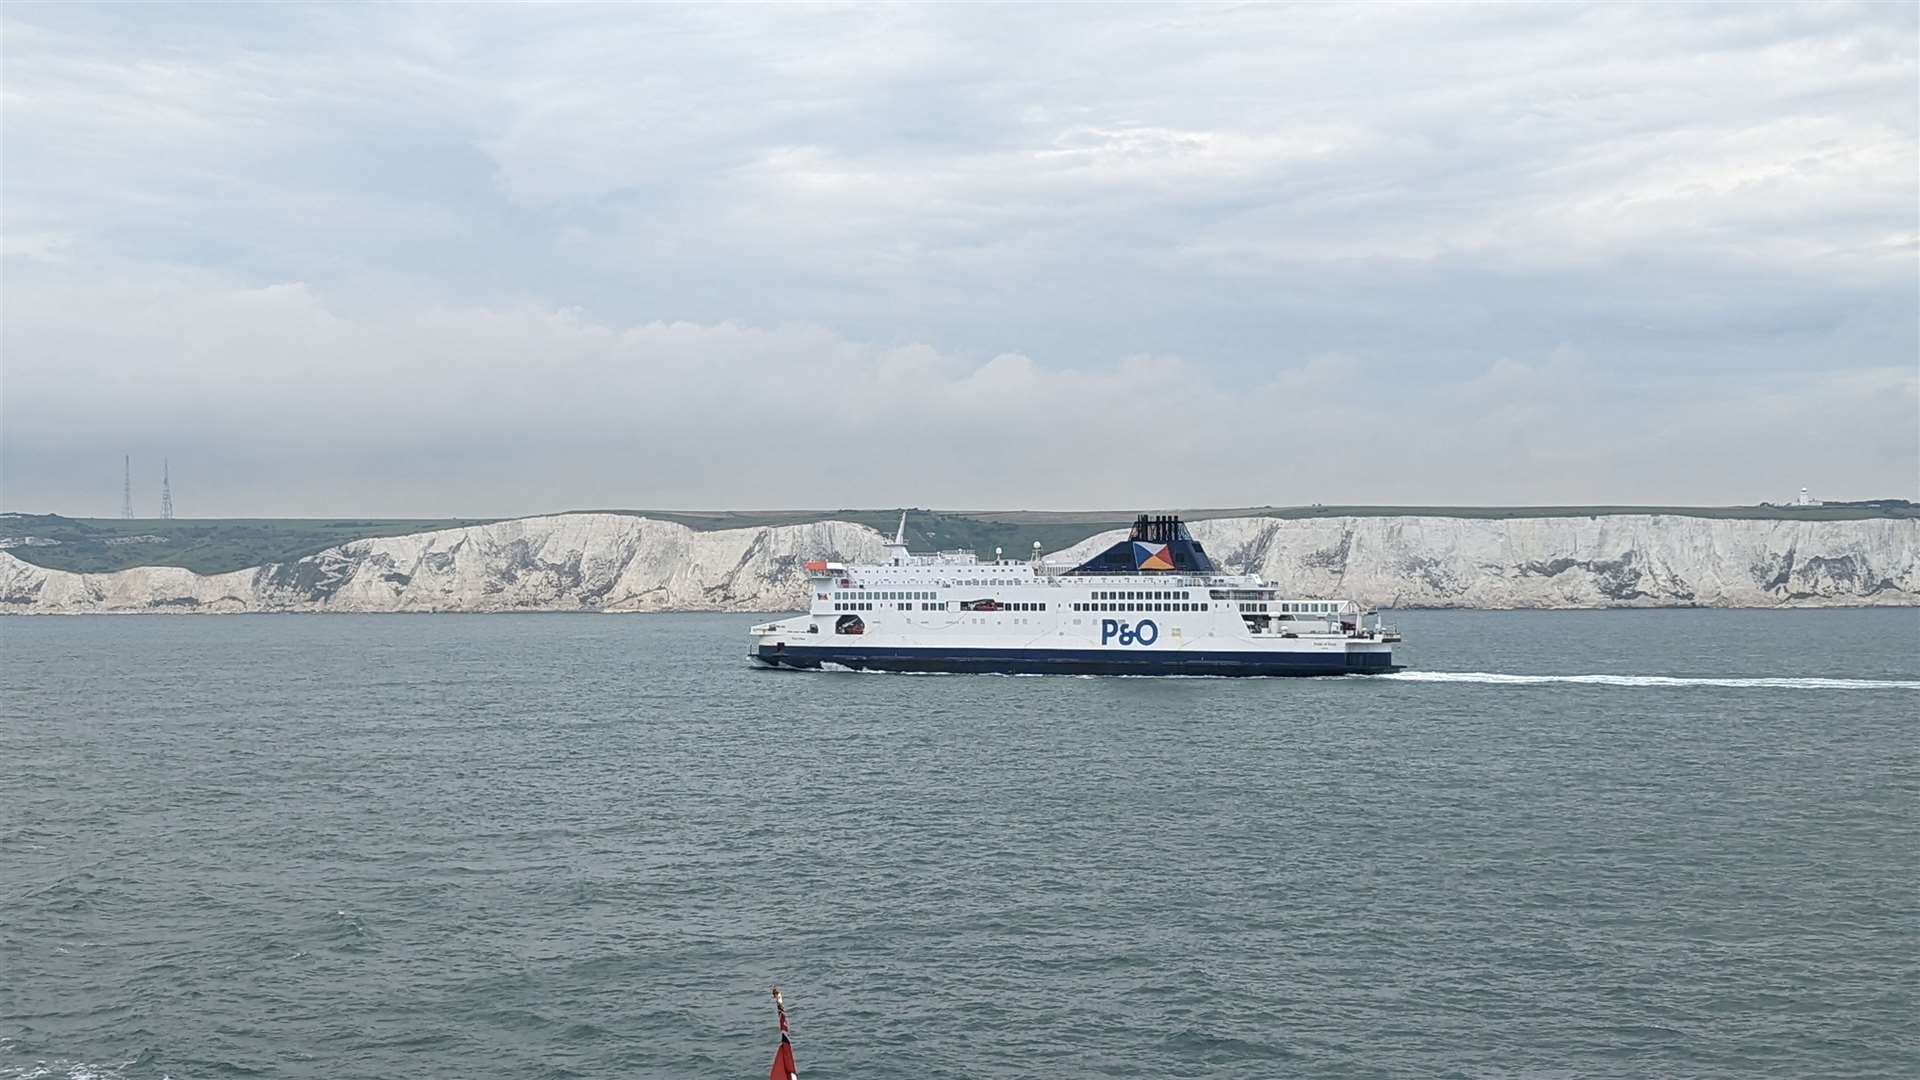 A P&O Ferries ship travelling from Calais to Dover passes in front of the White Cliffs of Dover